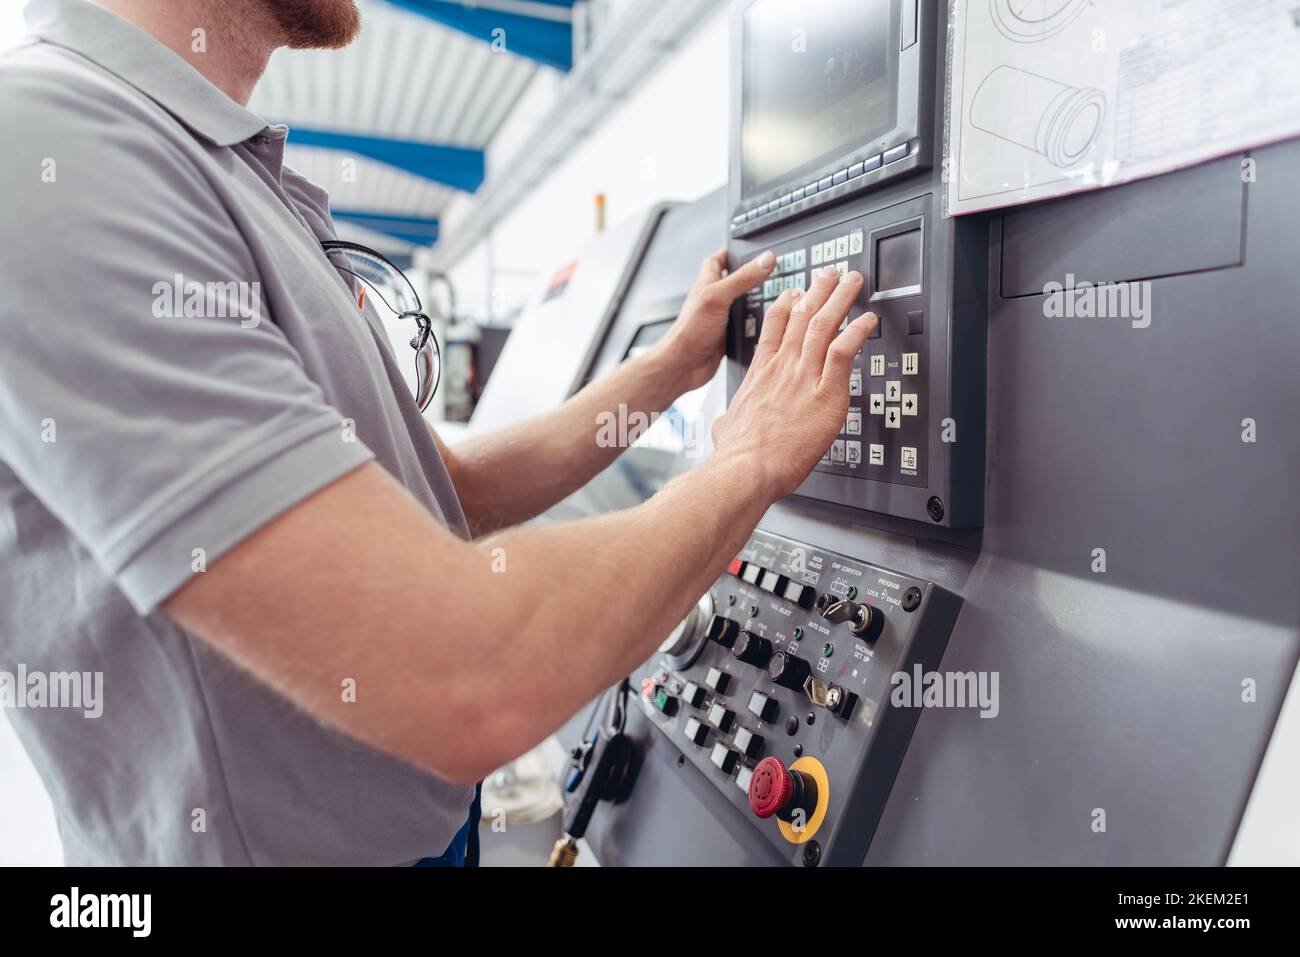 Manufacturing worker programming industrial CNC machine tool Stock Photo